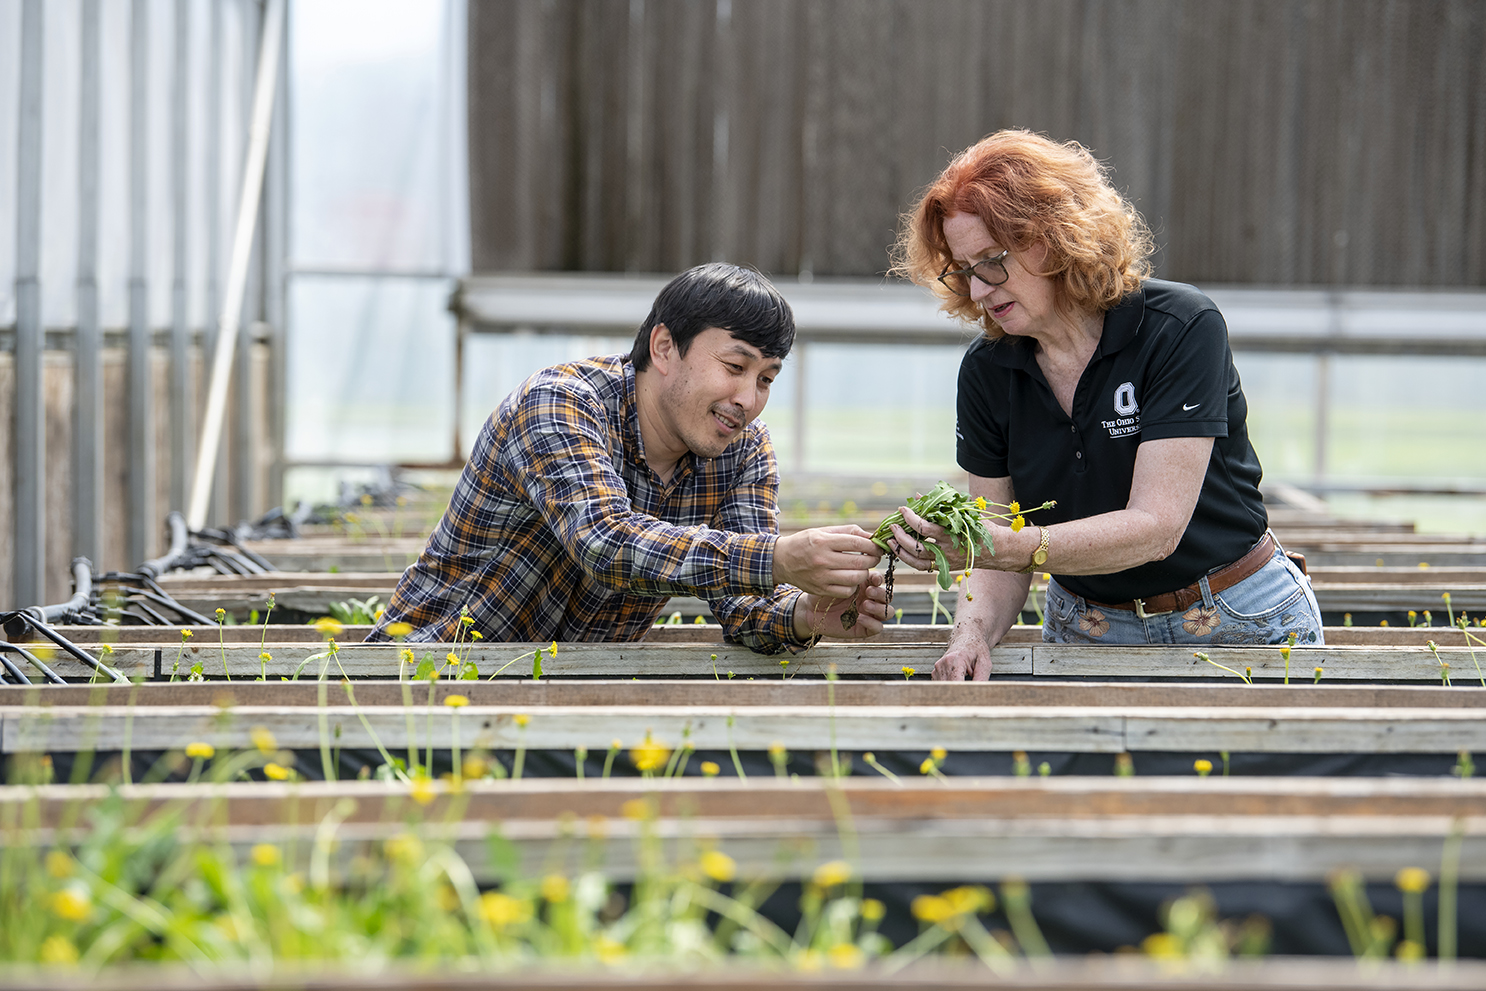 Two employees work together in a greenhouse